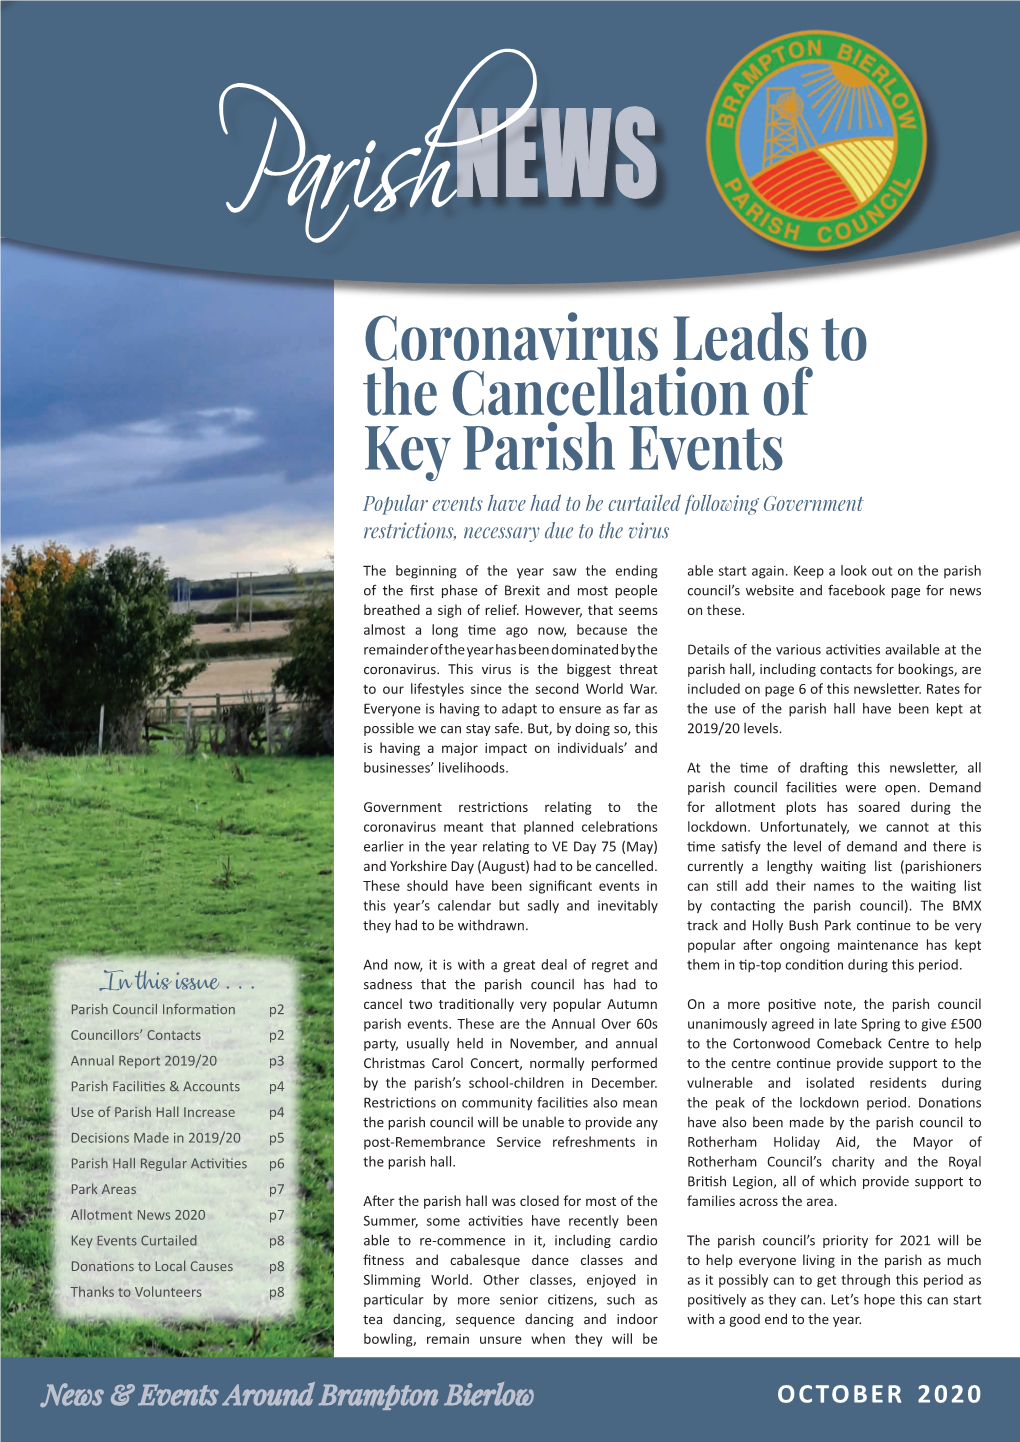 Coronavirus Leads to the Cancellation of Key Parish Events Popular Events Have Had to Be Curtailed Following Government Restrictions, Necessary Due to the Virus